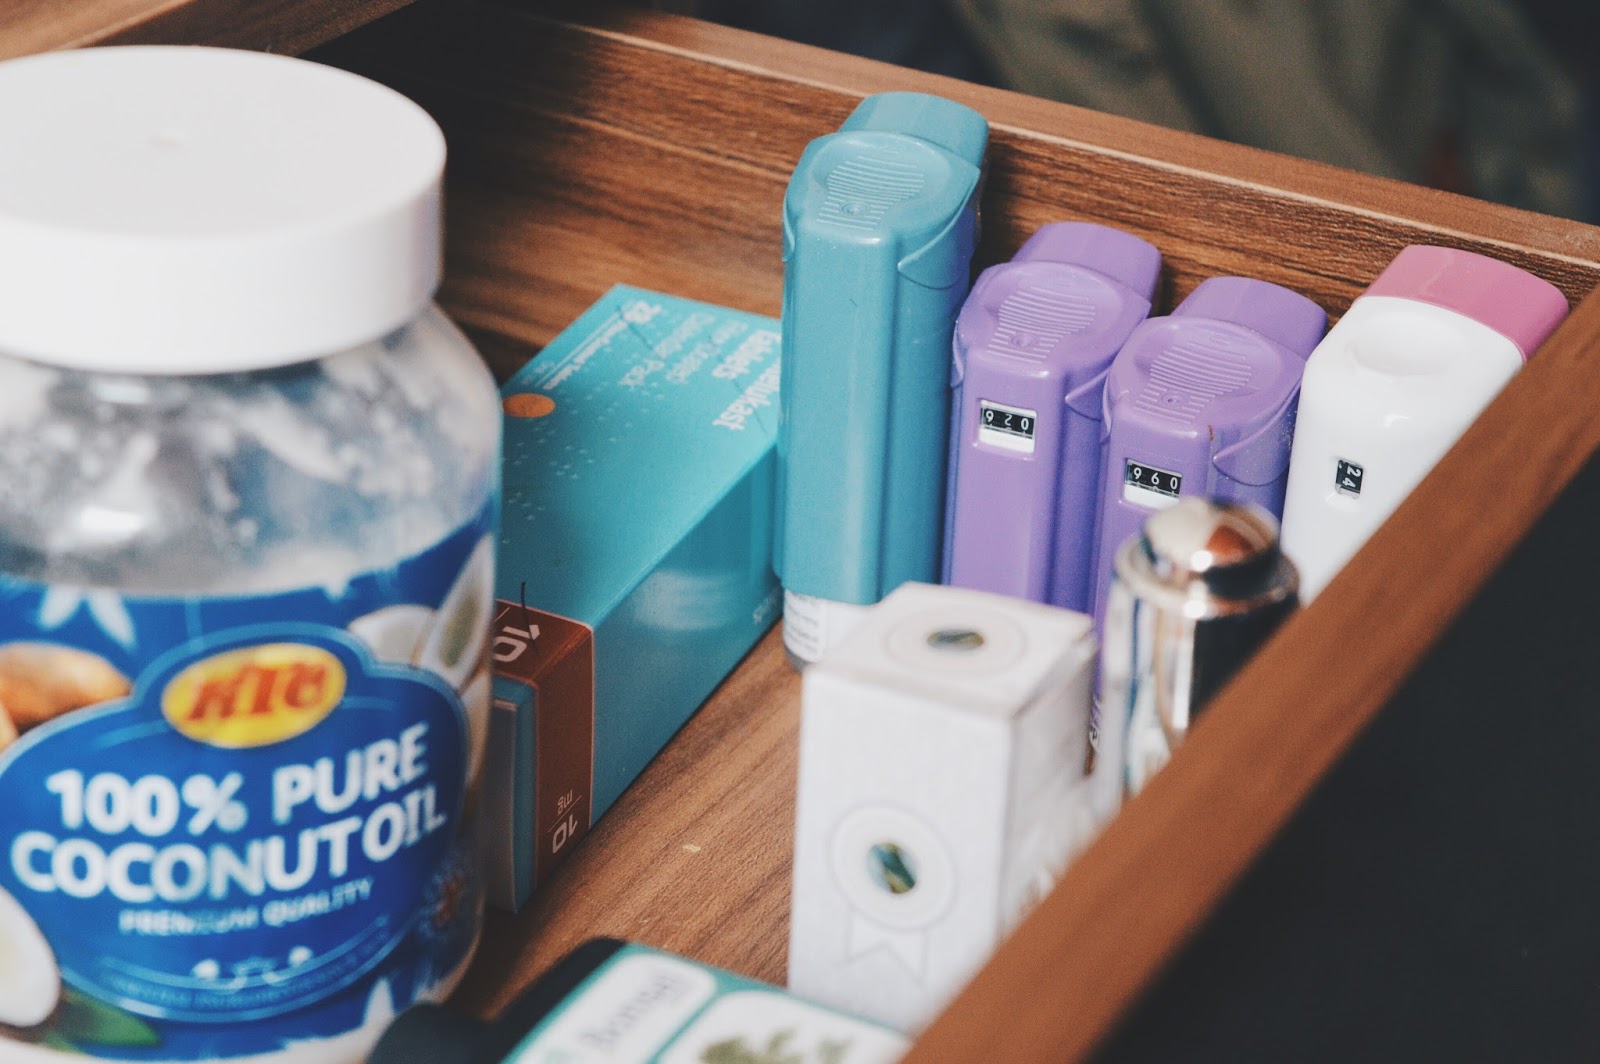 asthma medication in drawer